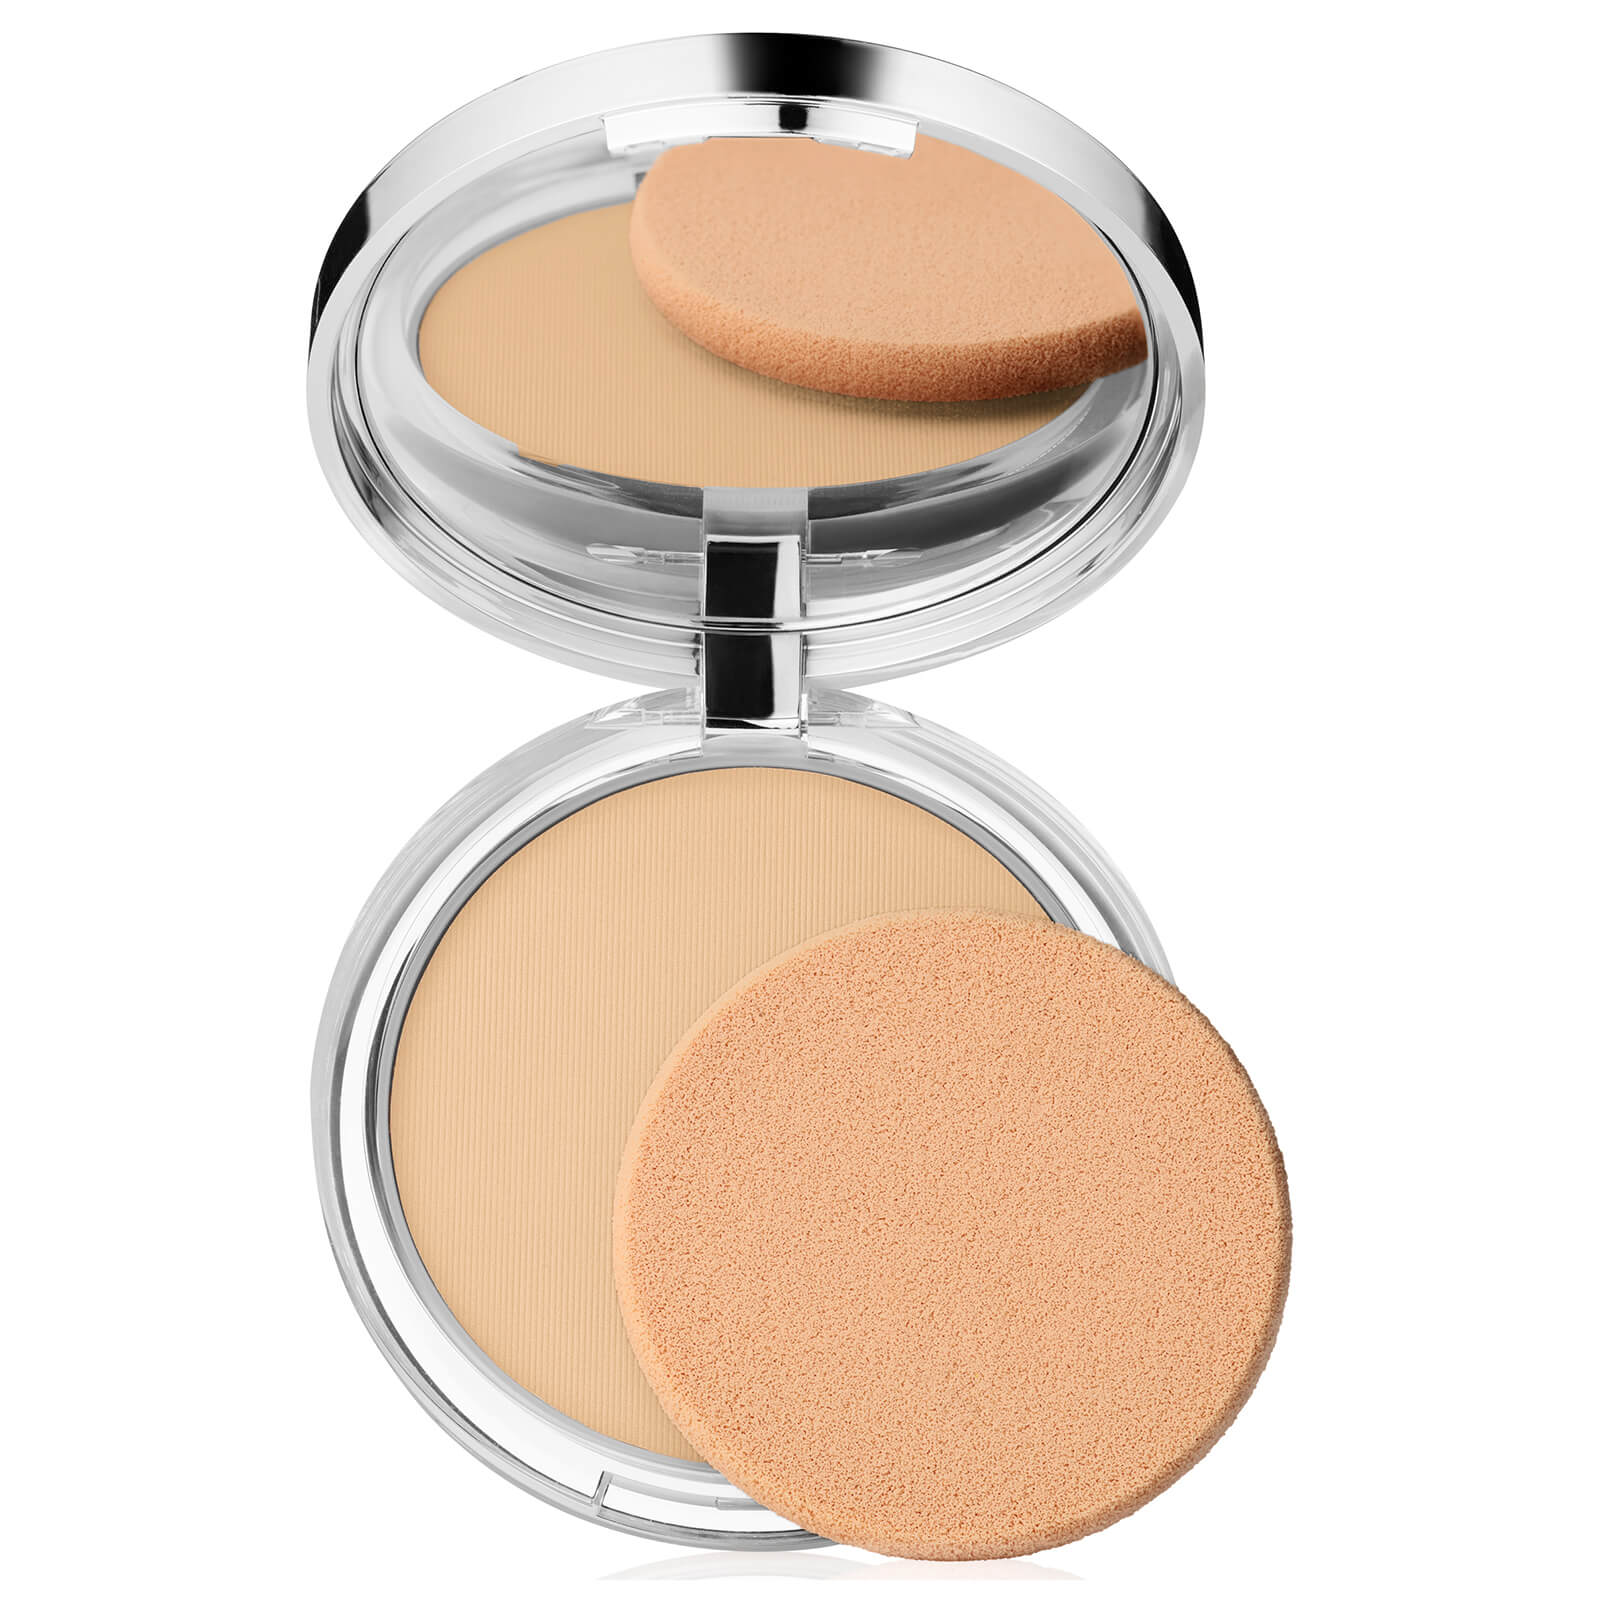 Clinique Stay-Matte Sheer Pressed Powder Oil-Free 7.6g (Various Shades) - Invisible Matte